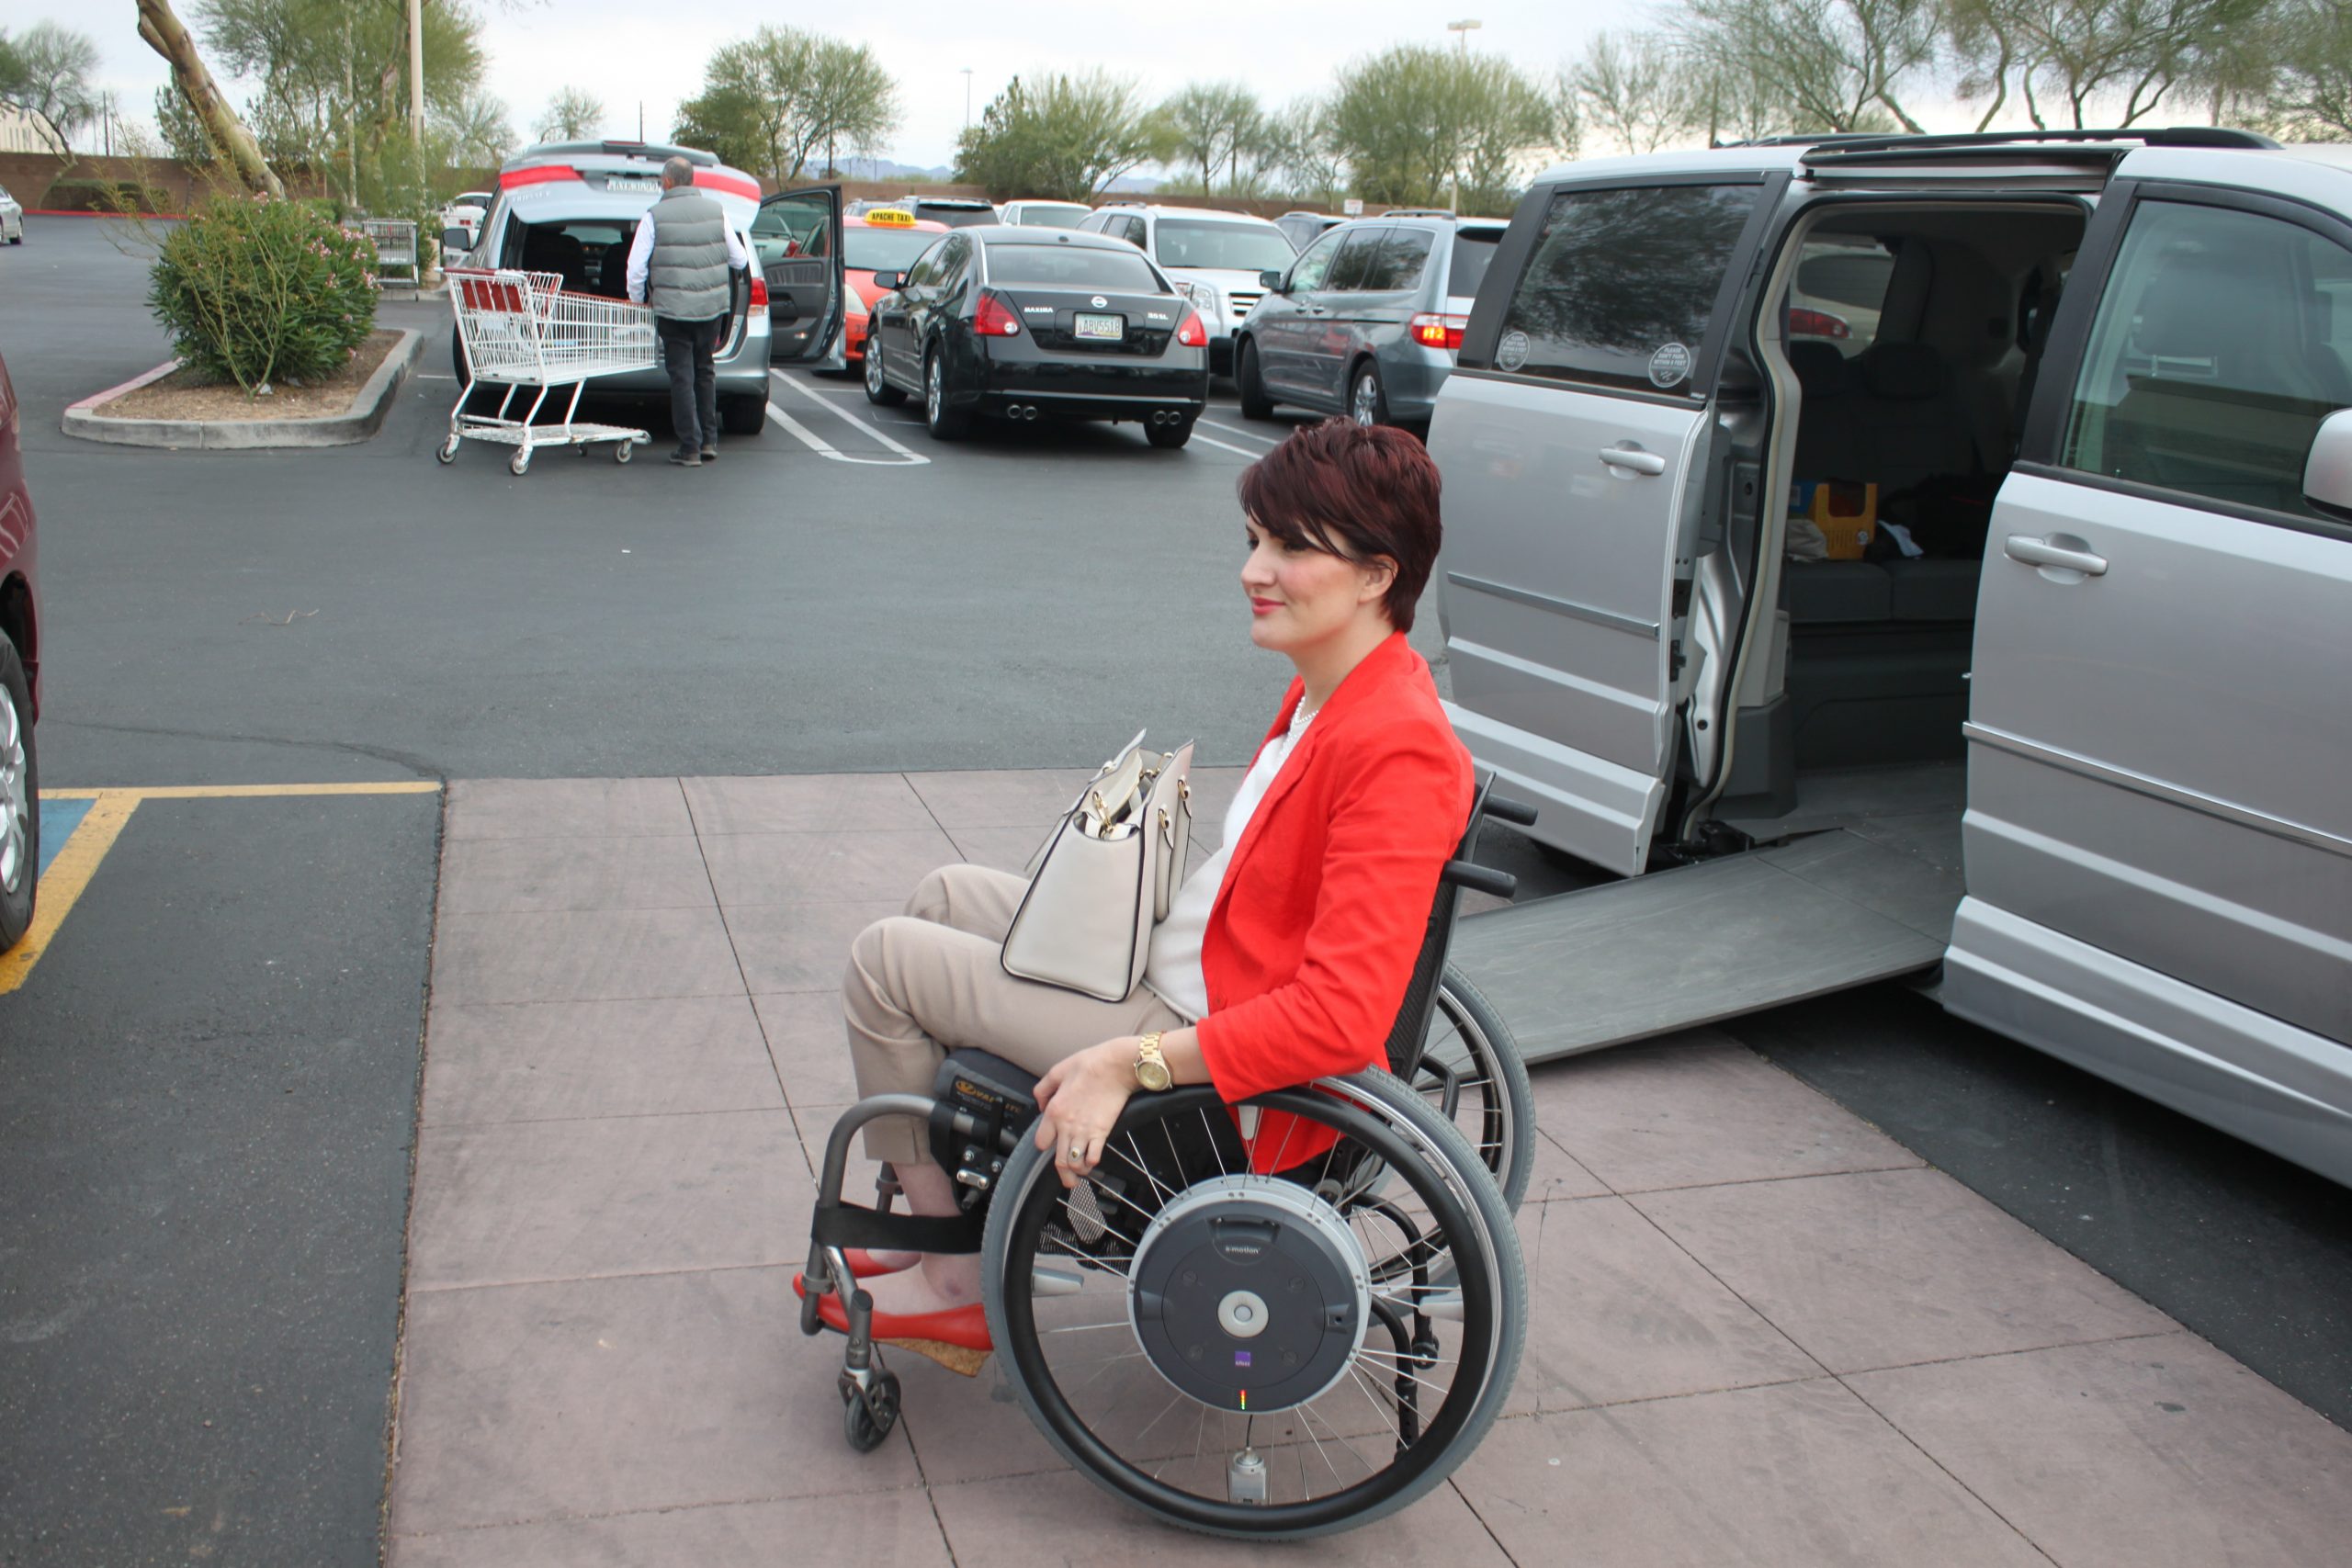 PL UPHKJJ3 original scaled - Drivers with Disabilities Call for Legislative Support for More Accessible Fueling